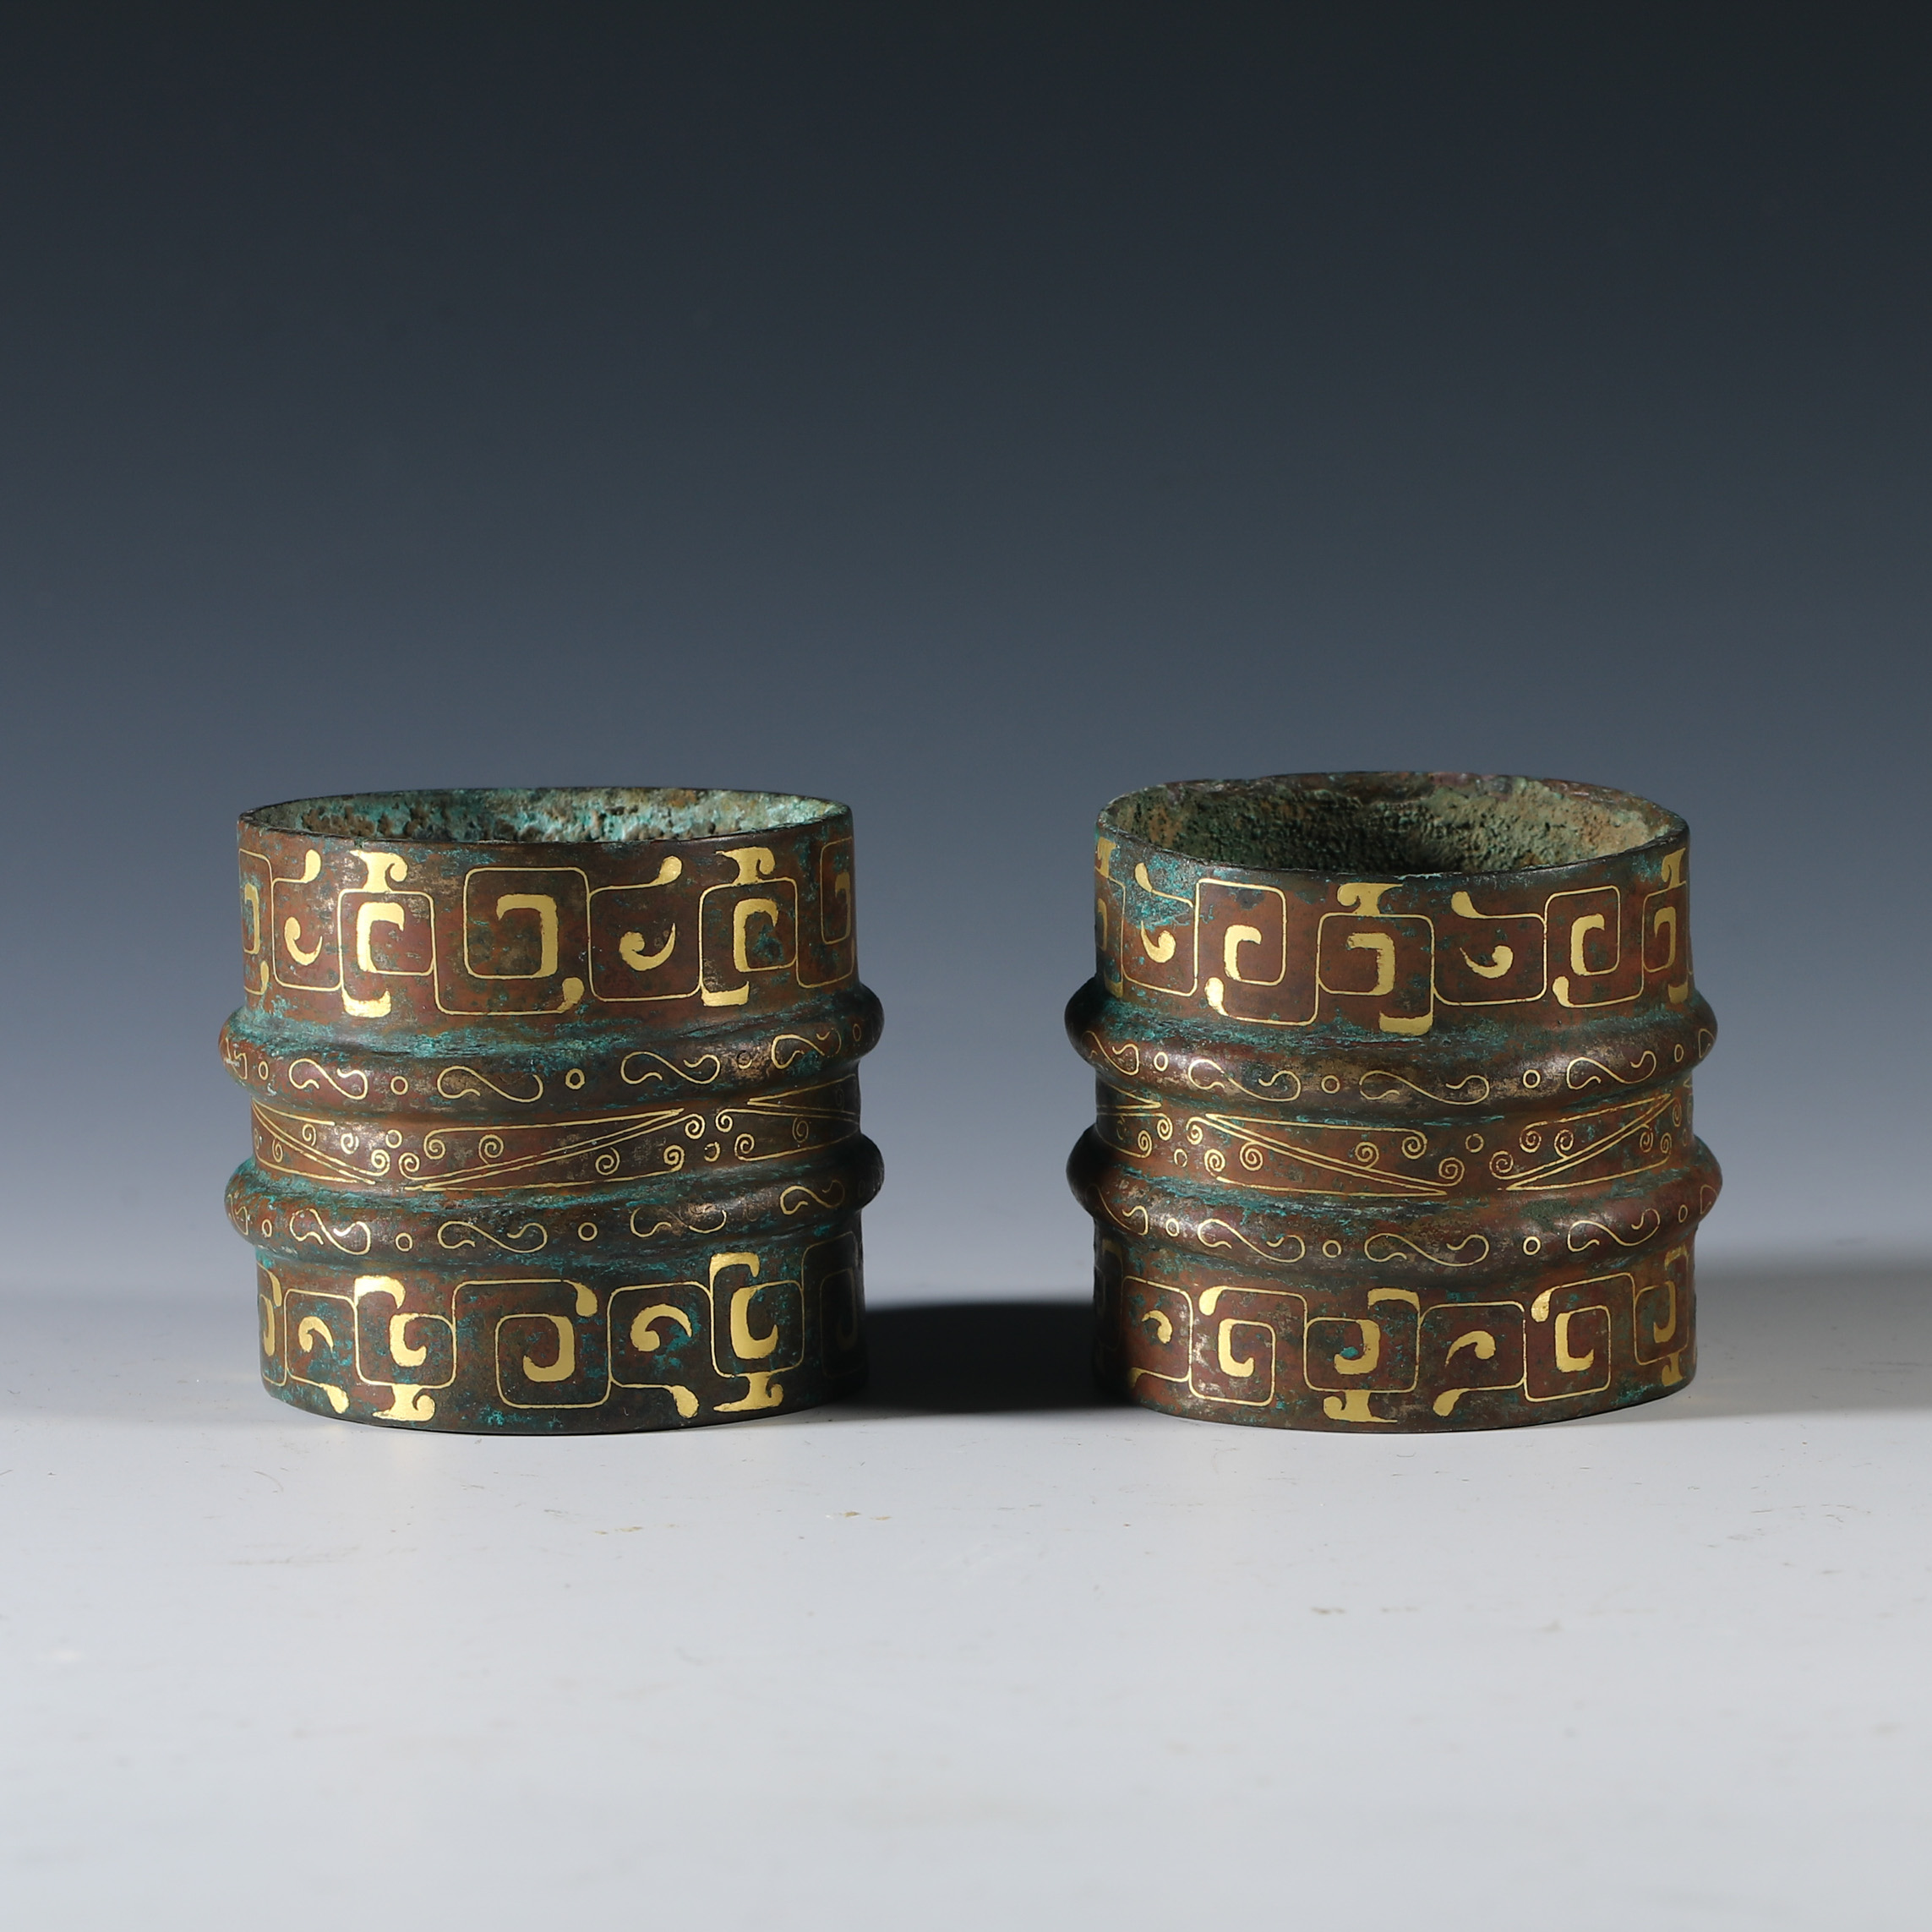 A group of copper and gold components  from the Han dynasty  - Image 2 of 7